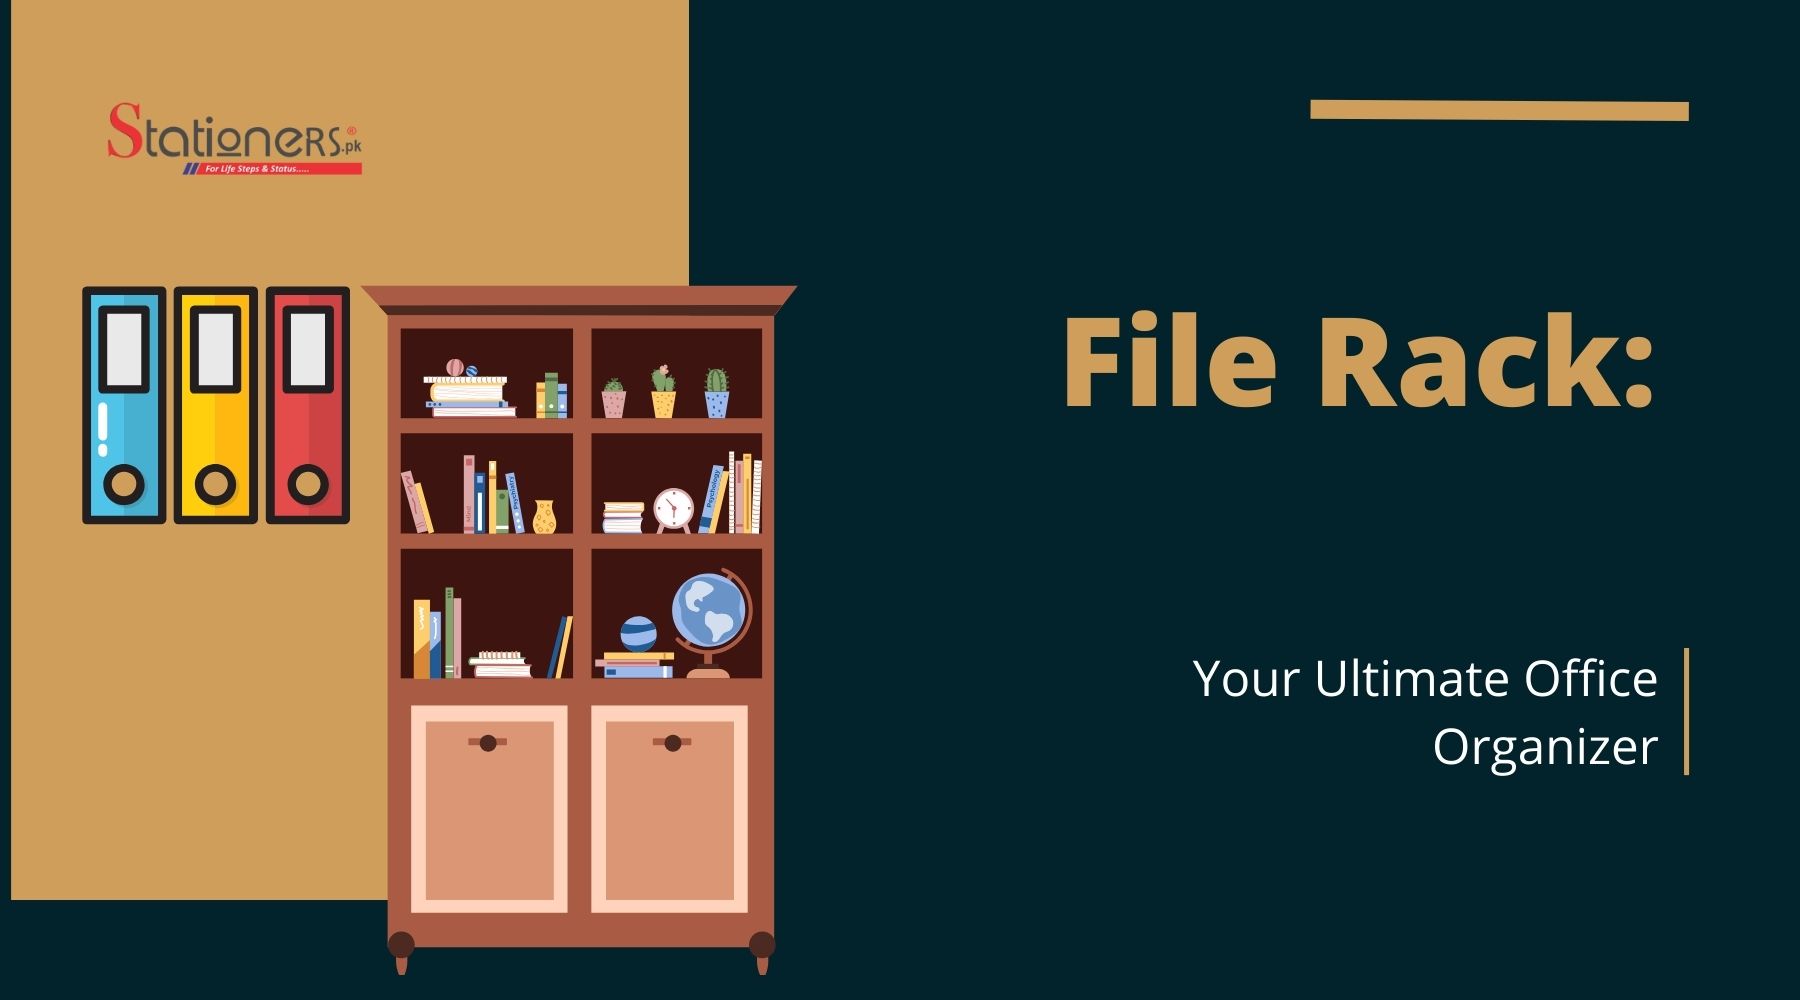 File Rack: Your Ultimate Office Organizer